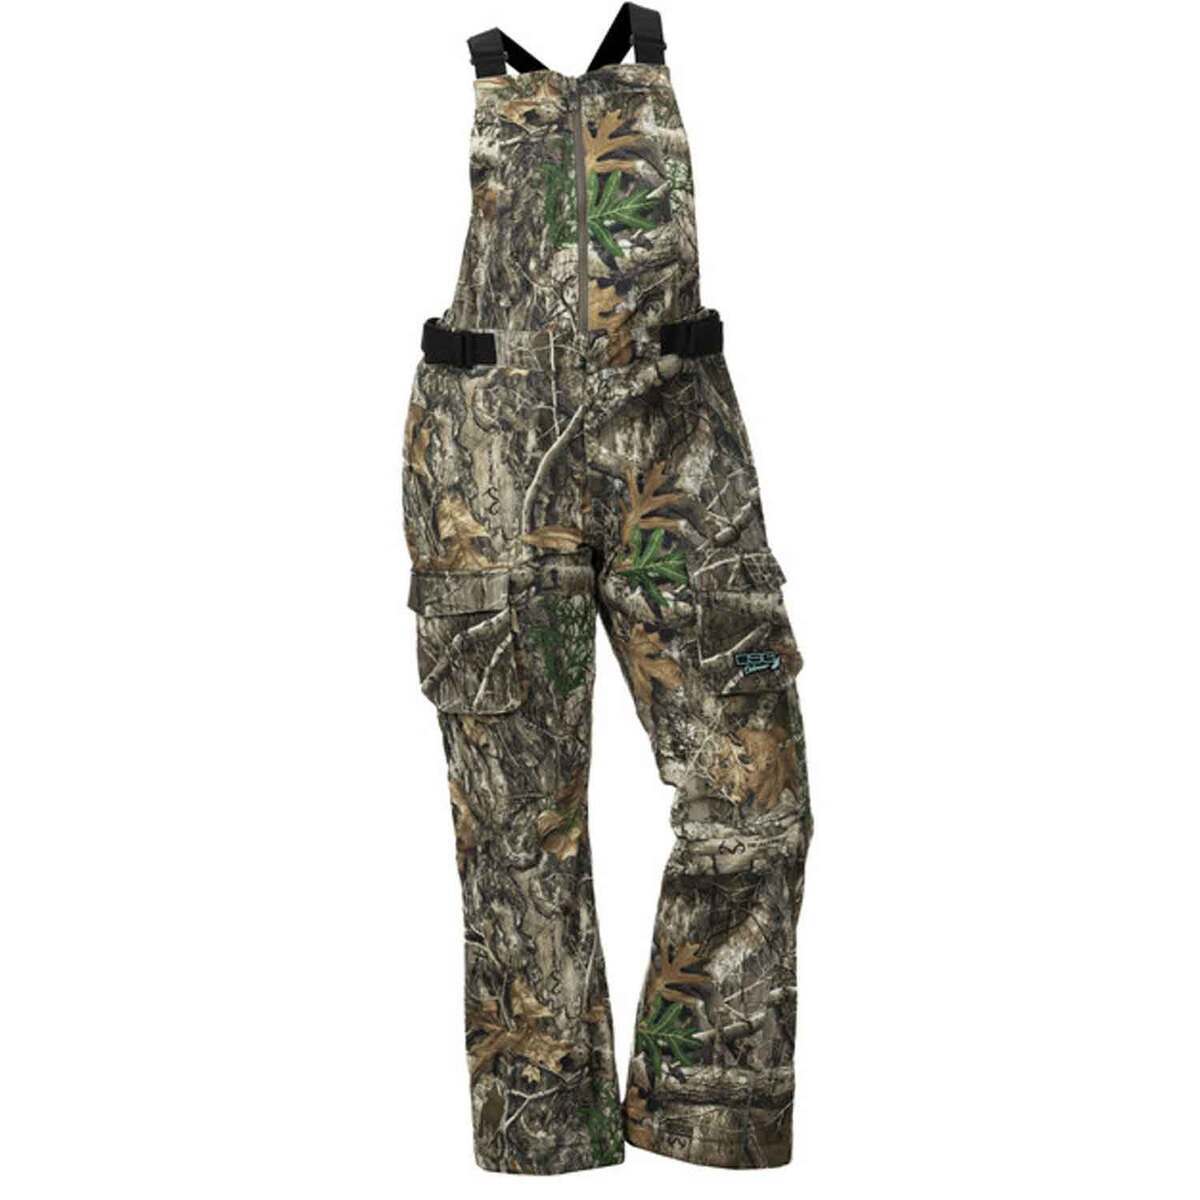 DSG Outerwear Women's Realtree Edge Kylie 5.0 Drop Seat Hunting